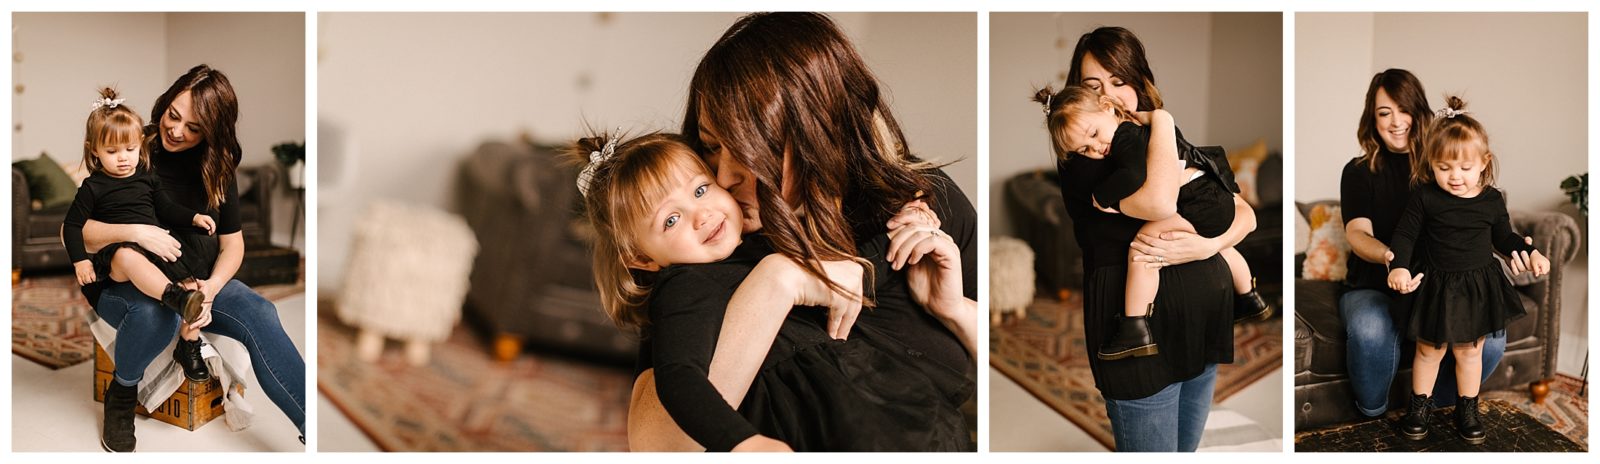 Mommy and Me Photography | Studio Photography | Minneapolis Photographer | Phoenix Photographer